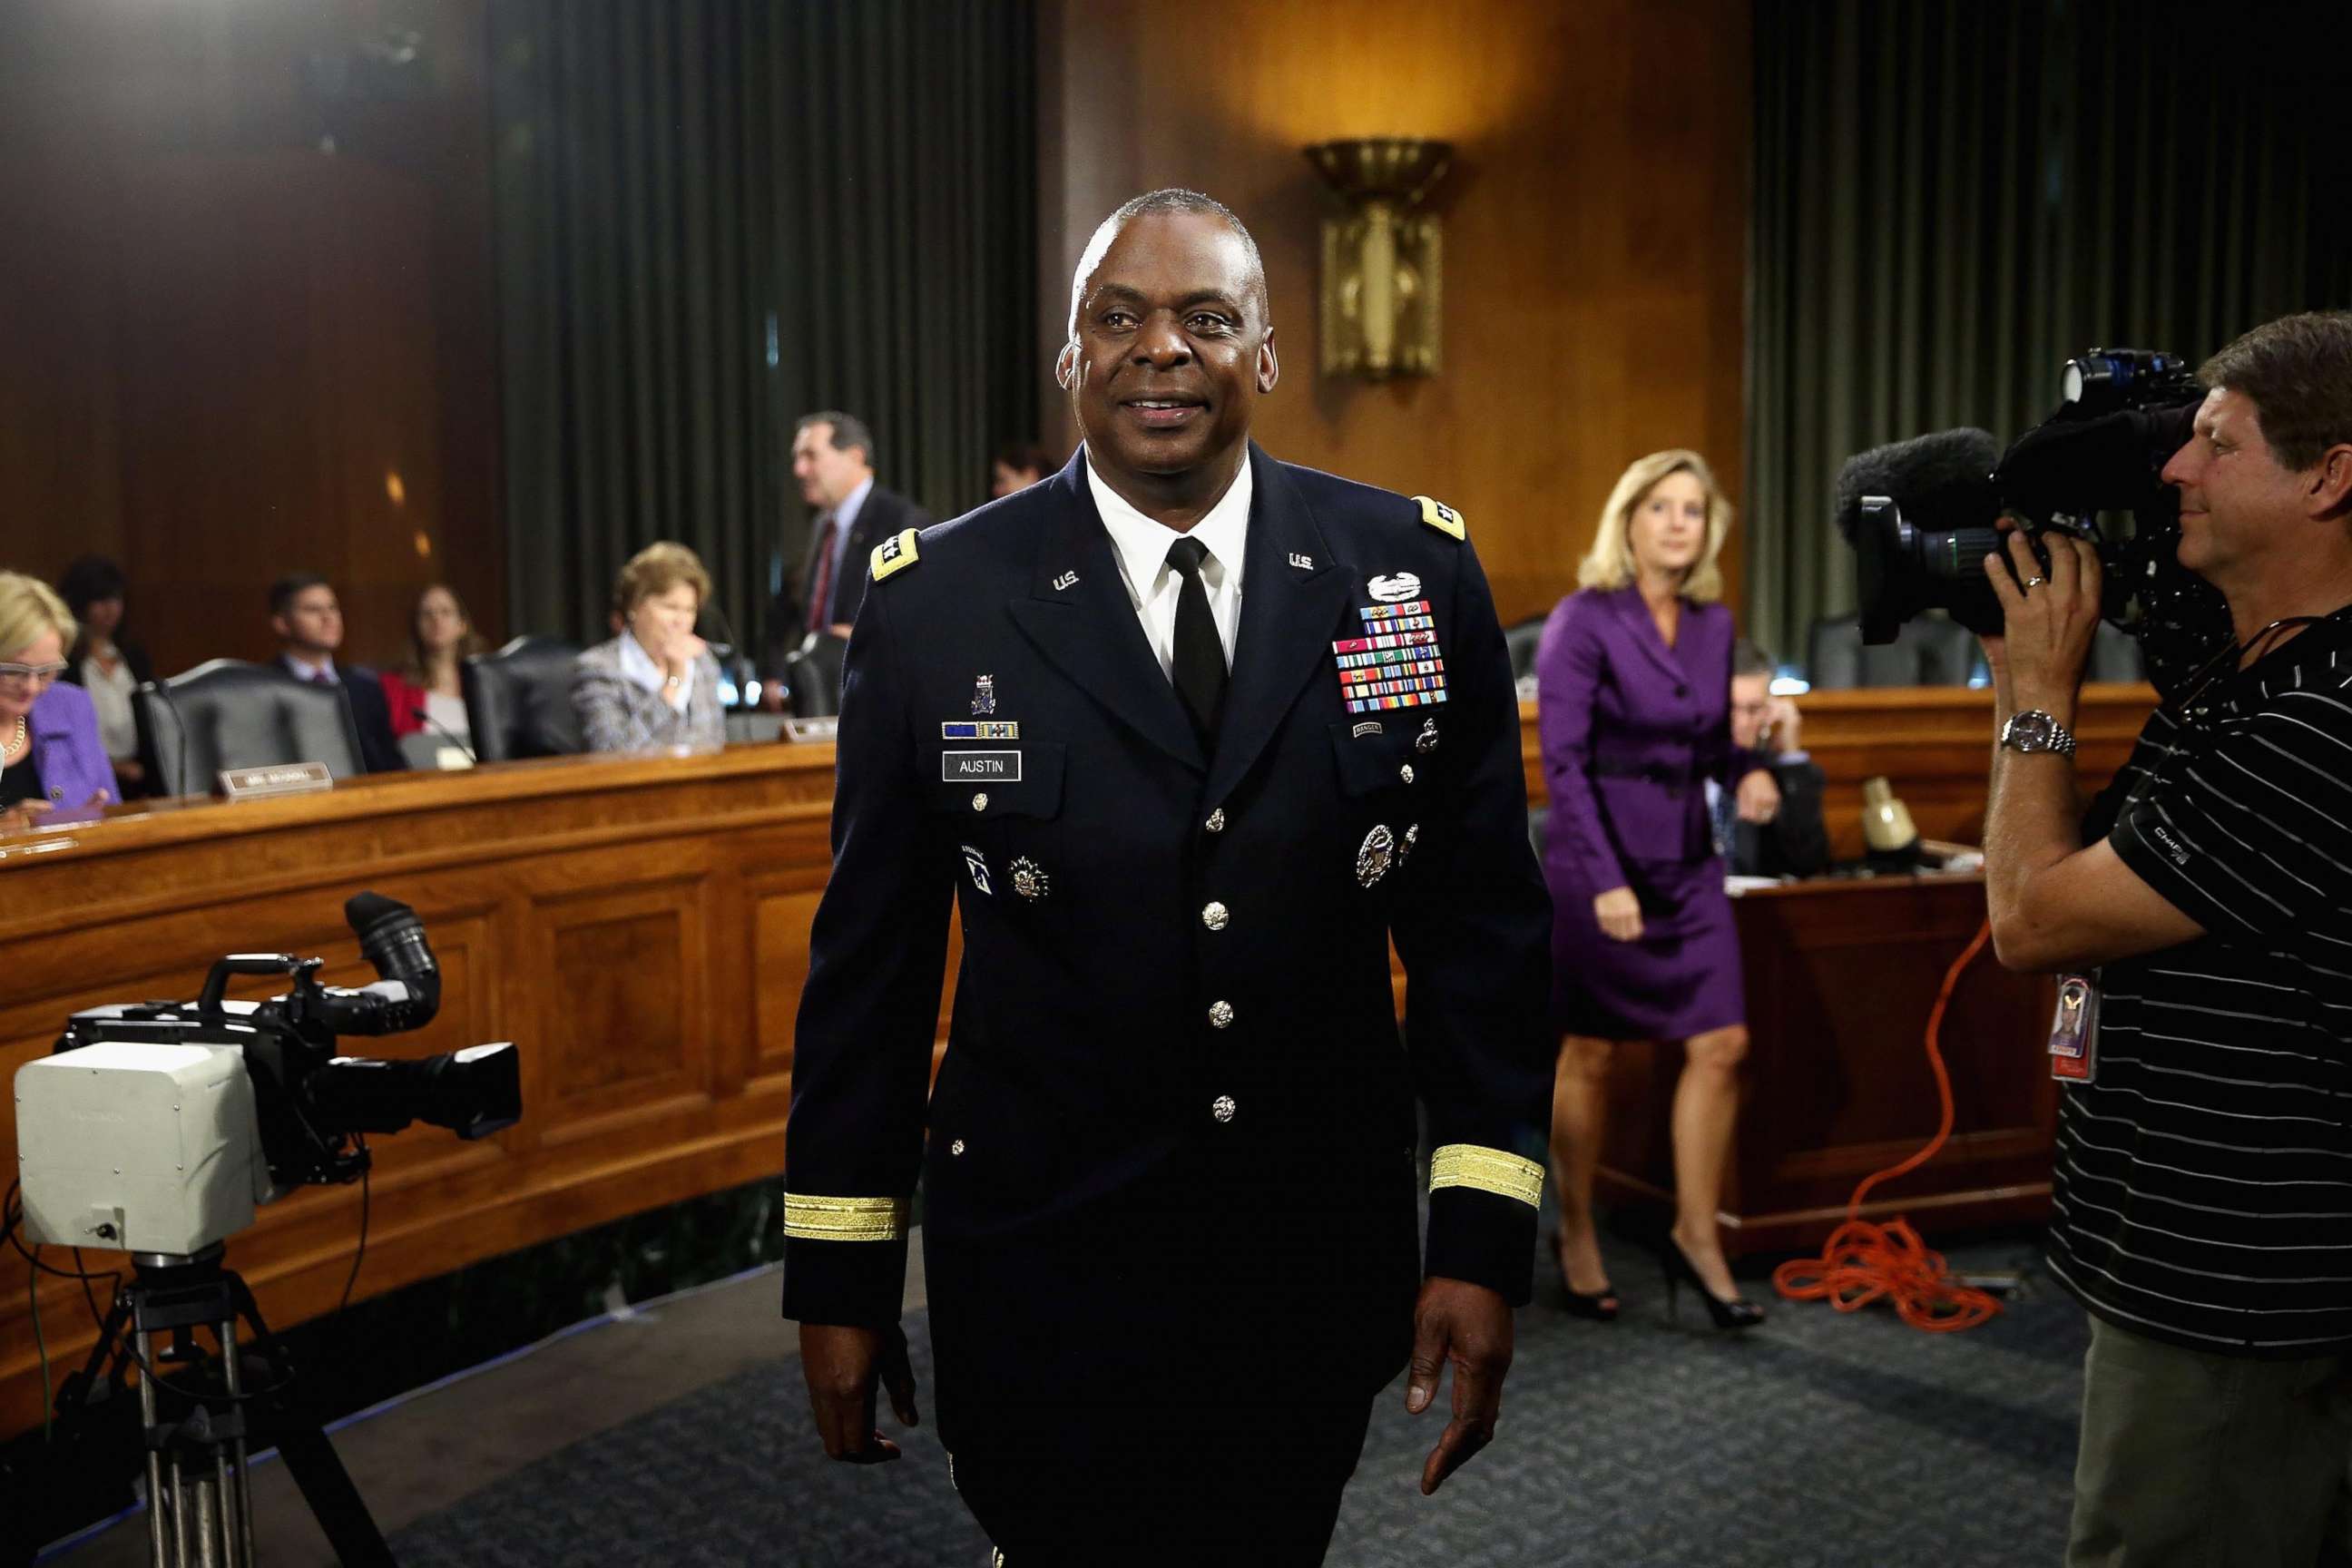 PHOTO: In this Sept. 16, 2015, file photo, Gen. Lloyd Austin III, commander of U.S. Central Command, prepares to testify before the Senate Armed Services Committee on Capitol Hill in Washington, DC.